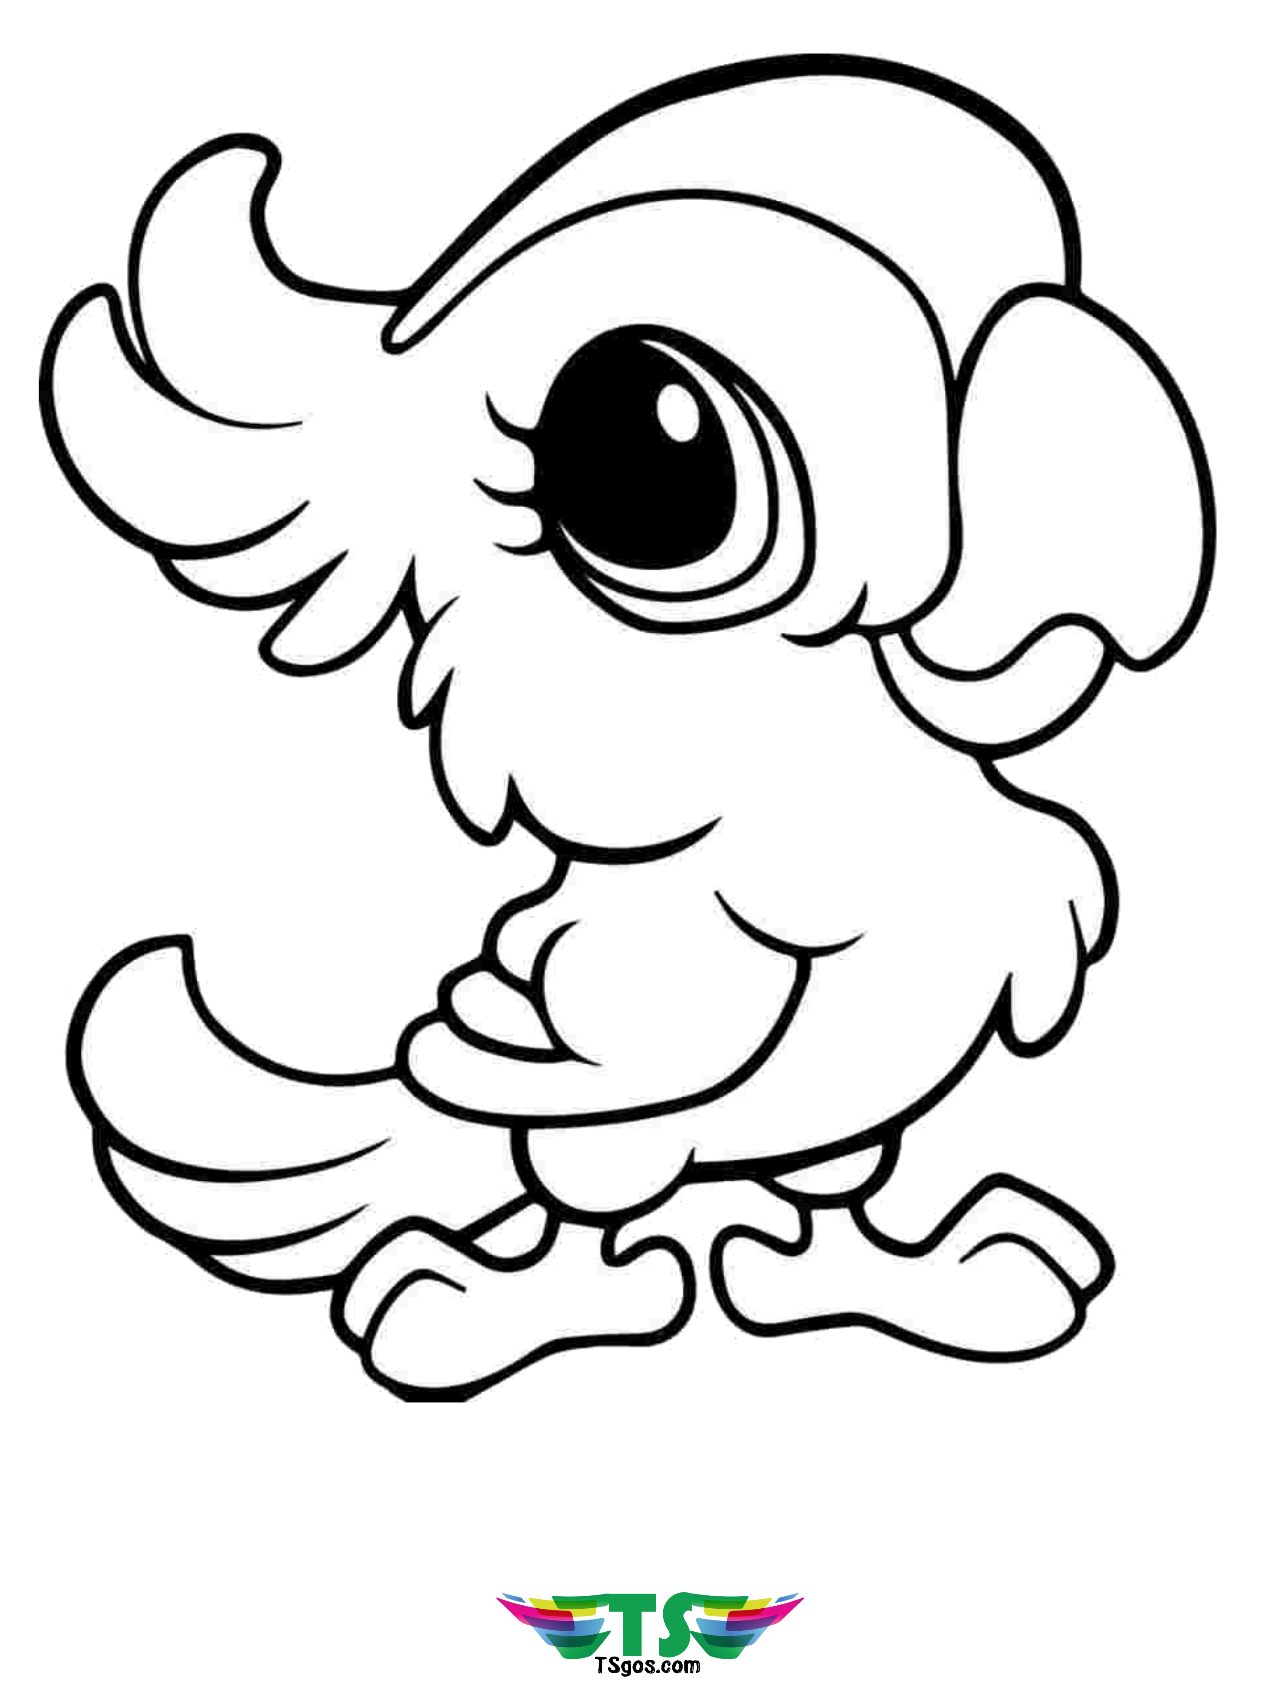 46 Bird Coloring Pages For Kids Photo Ideas – haramiran